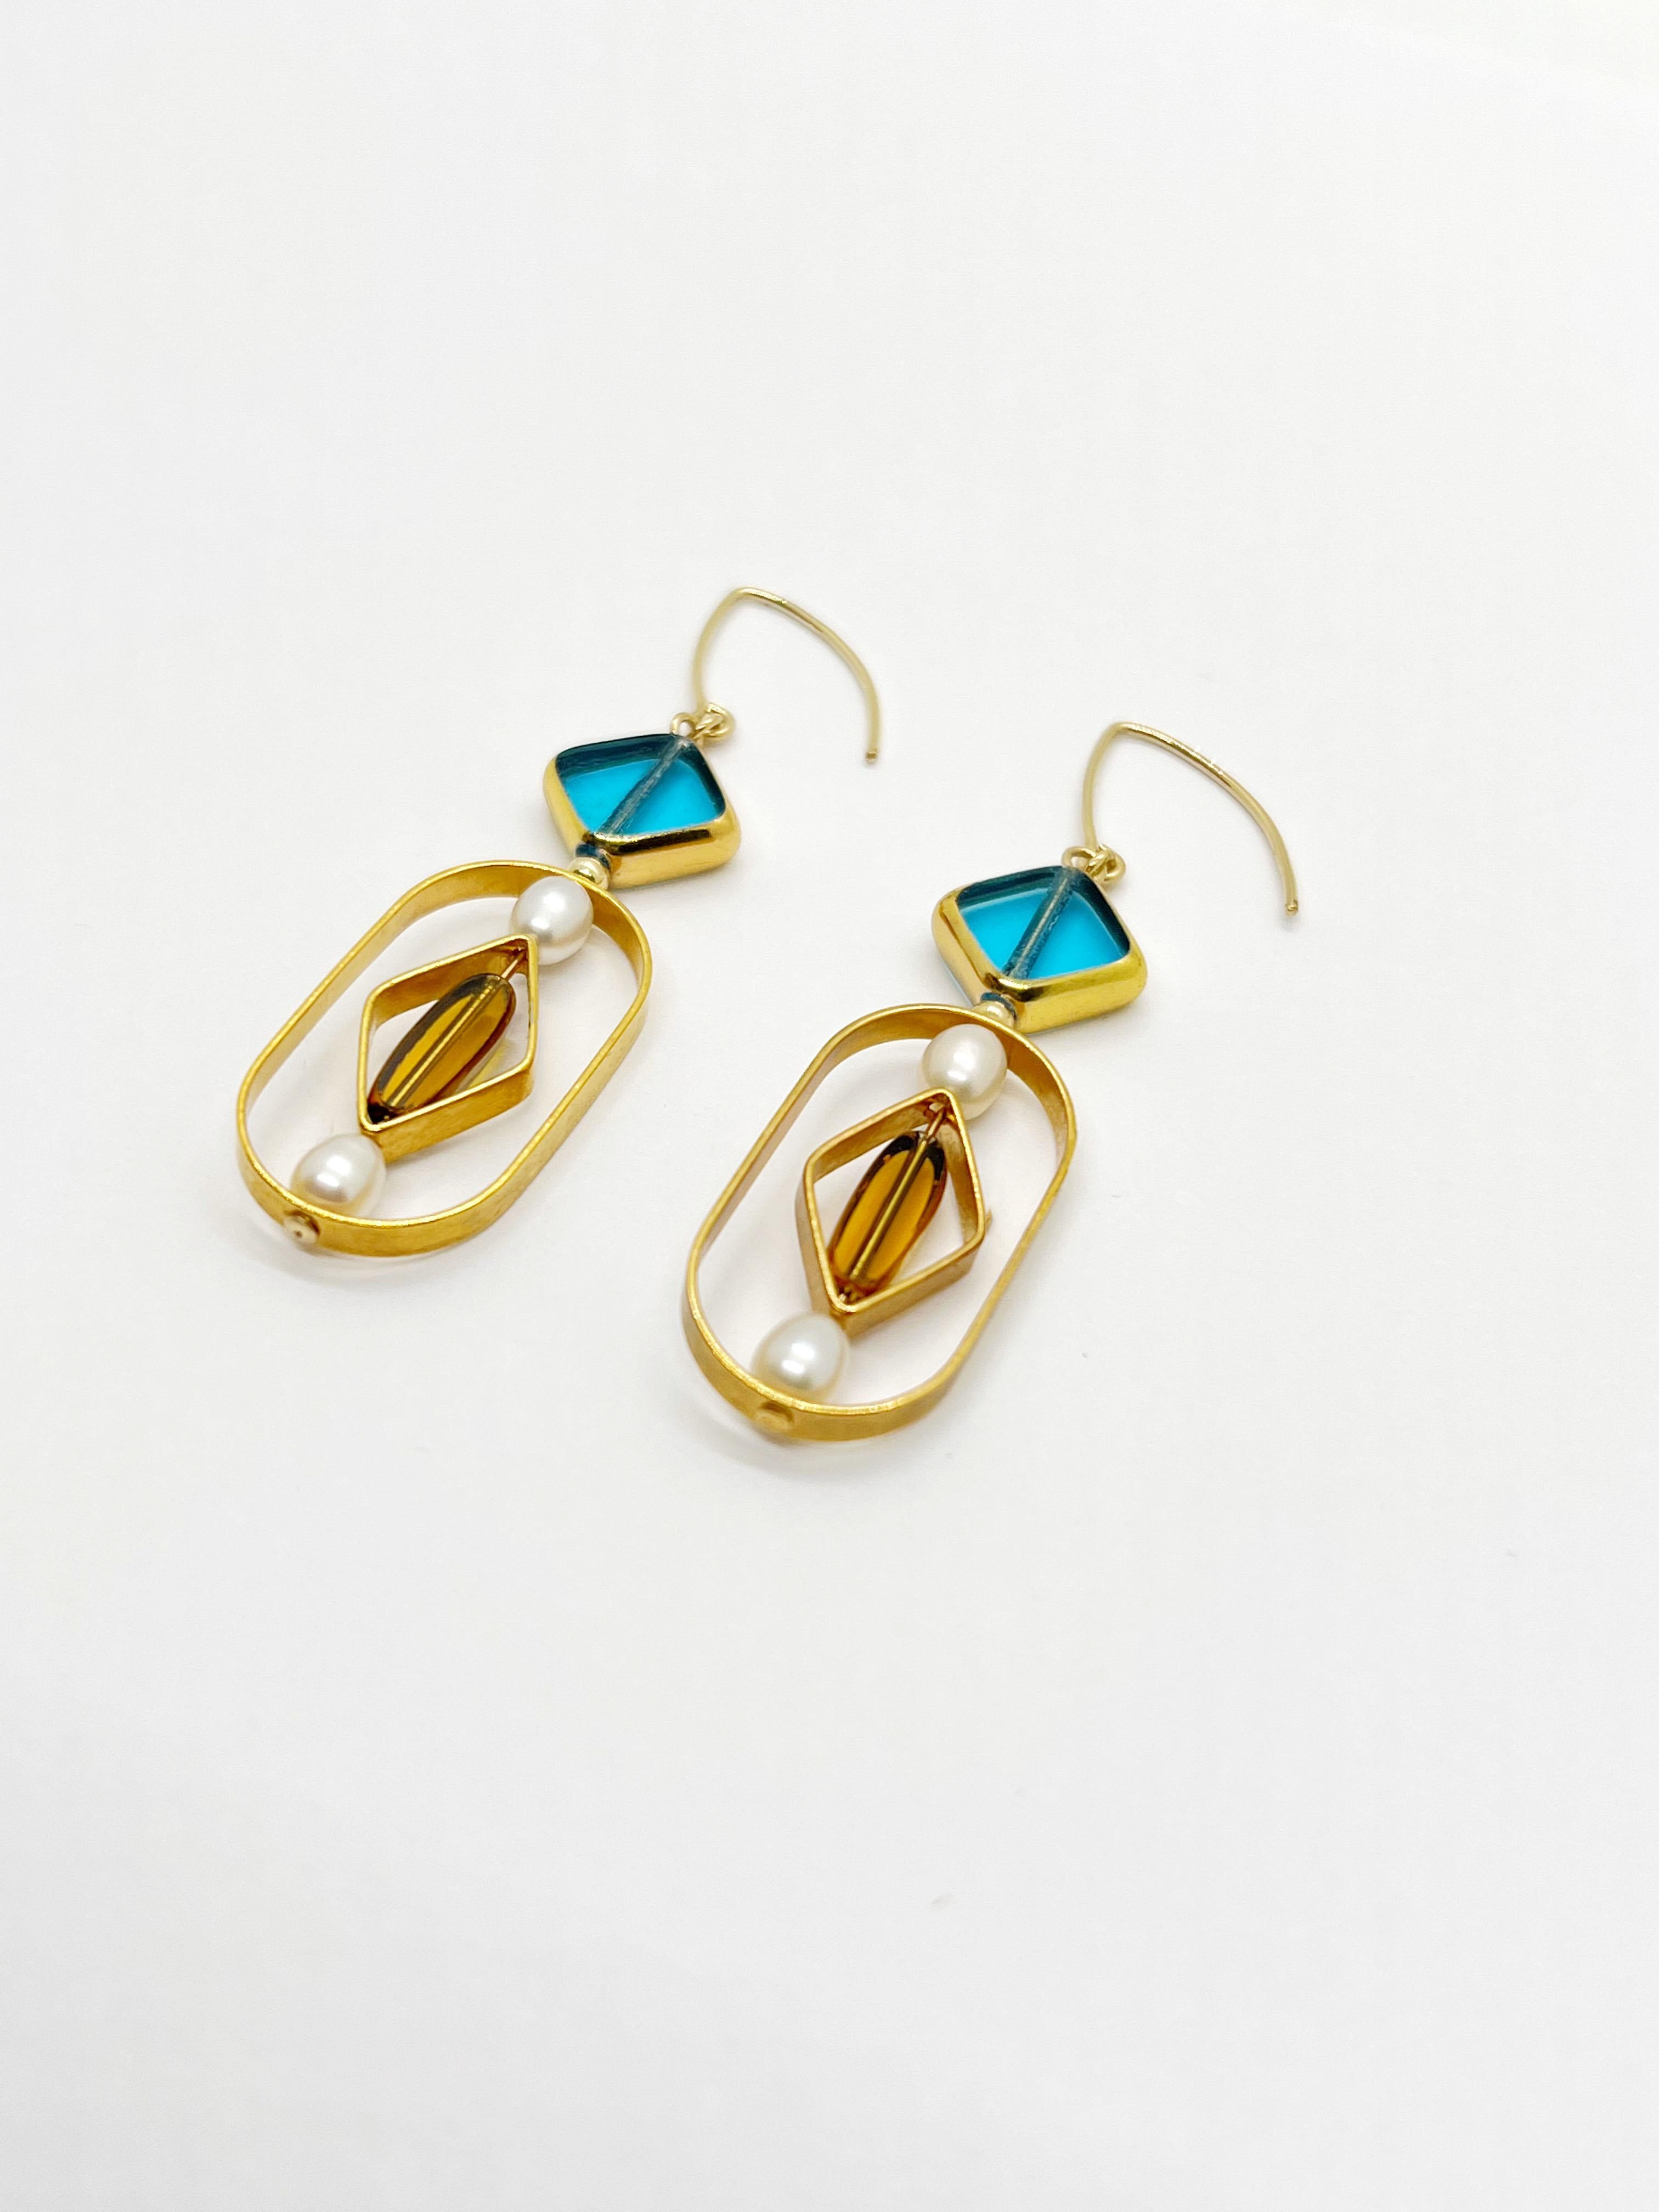 These earrings are light weight. It is composed of German Vintage Glass Beads that are edged with 24K gold. It is incorporated with oval freshwater pearls set in a geometric frame.

The vintage glass beads that is framed with 24K gold were hand